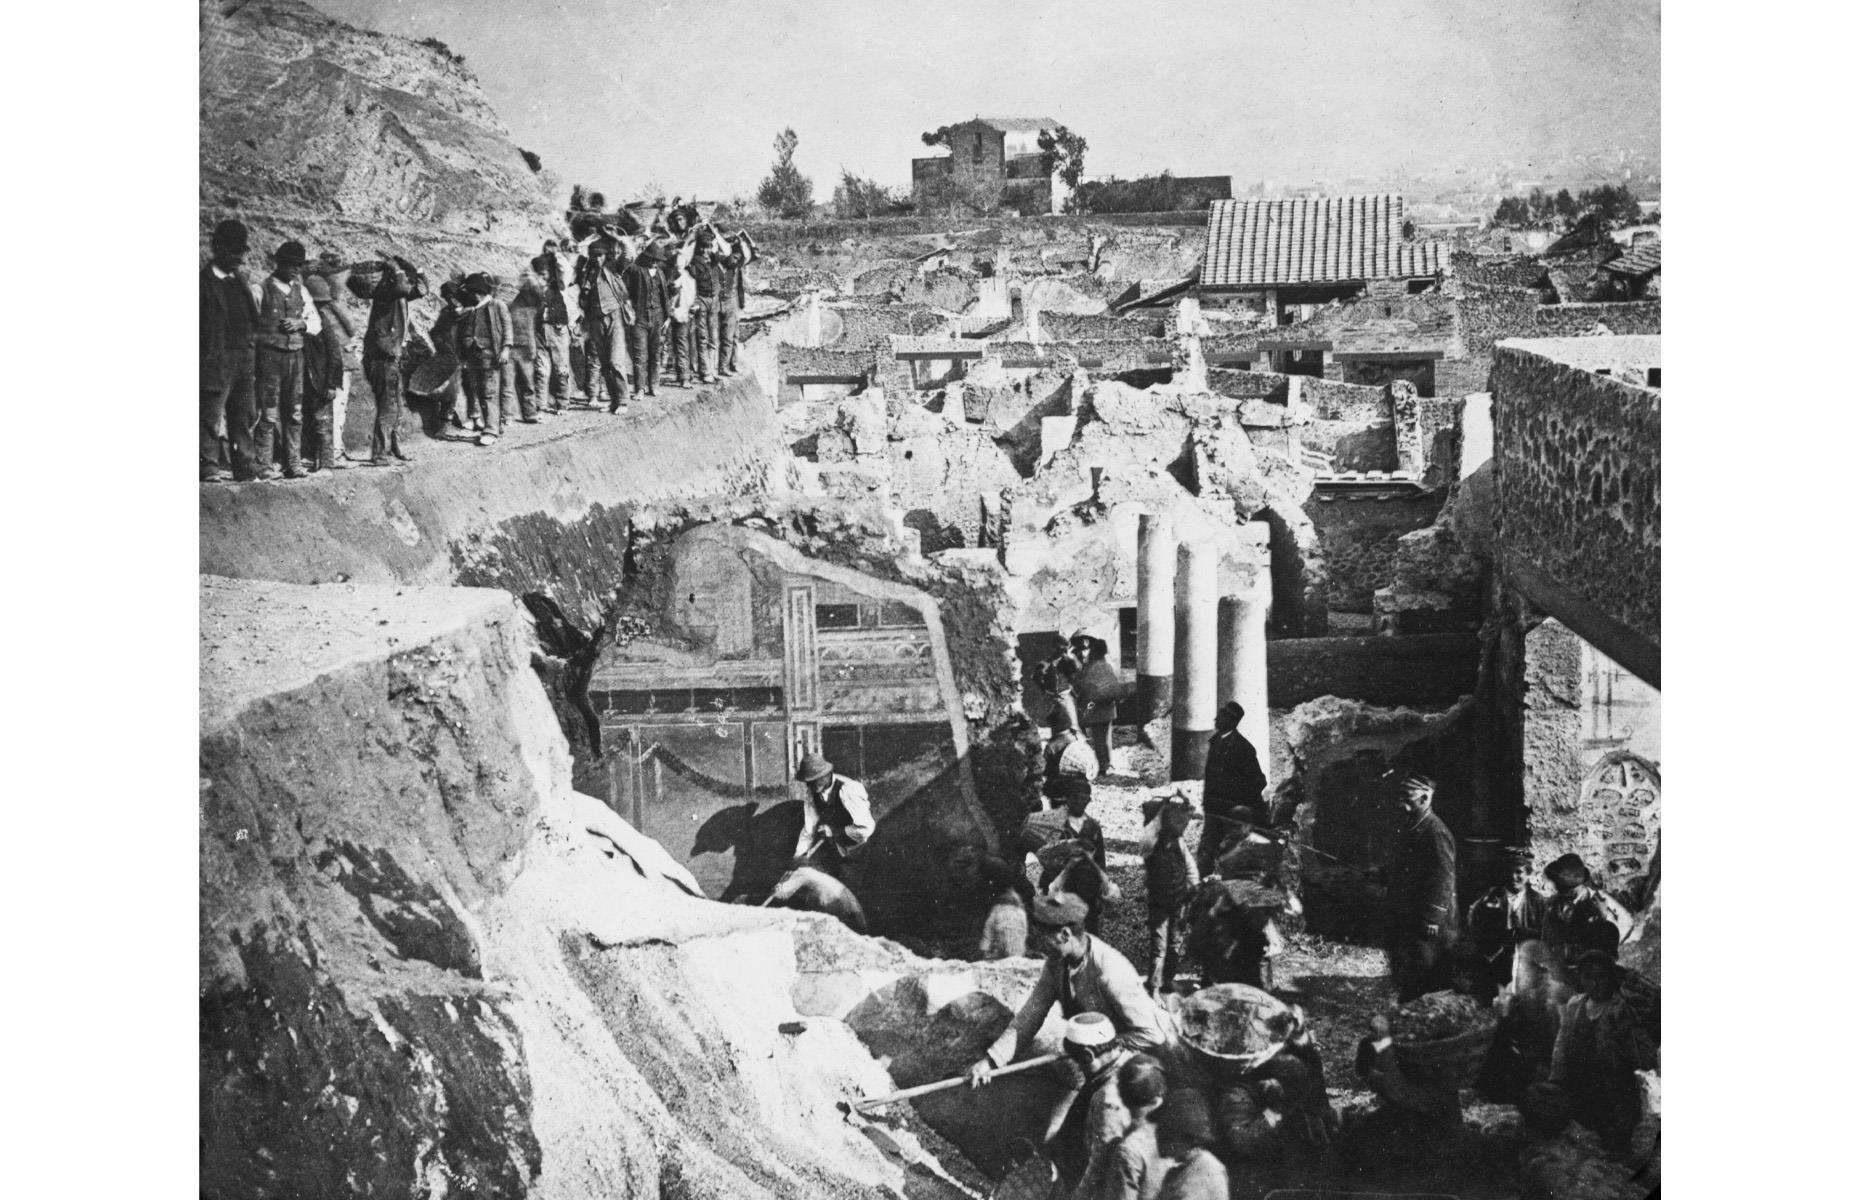 <p>People travel from all over the world to visit the vast archaeological site at Pompeii, drawn by the terrible story of a Roman city perfectly preserved under yards of ash after Mount Vesuvius erupted in AD 79. The laborers seen here worked for Italian archaeologist Giuseppe Fiorelli. He became director of excavations in 1860 and is credited with bringing order and clarity to the process. It was also his idea to make casts of the poor souls who had perished by pouring plaster into the hollows formed in the volcanic ash where their bodies had disintegrated.</p>